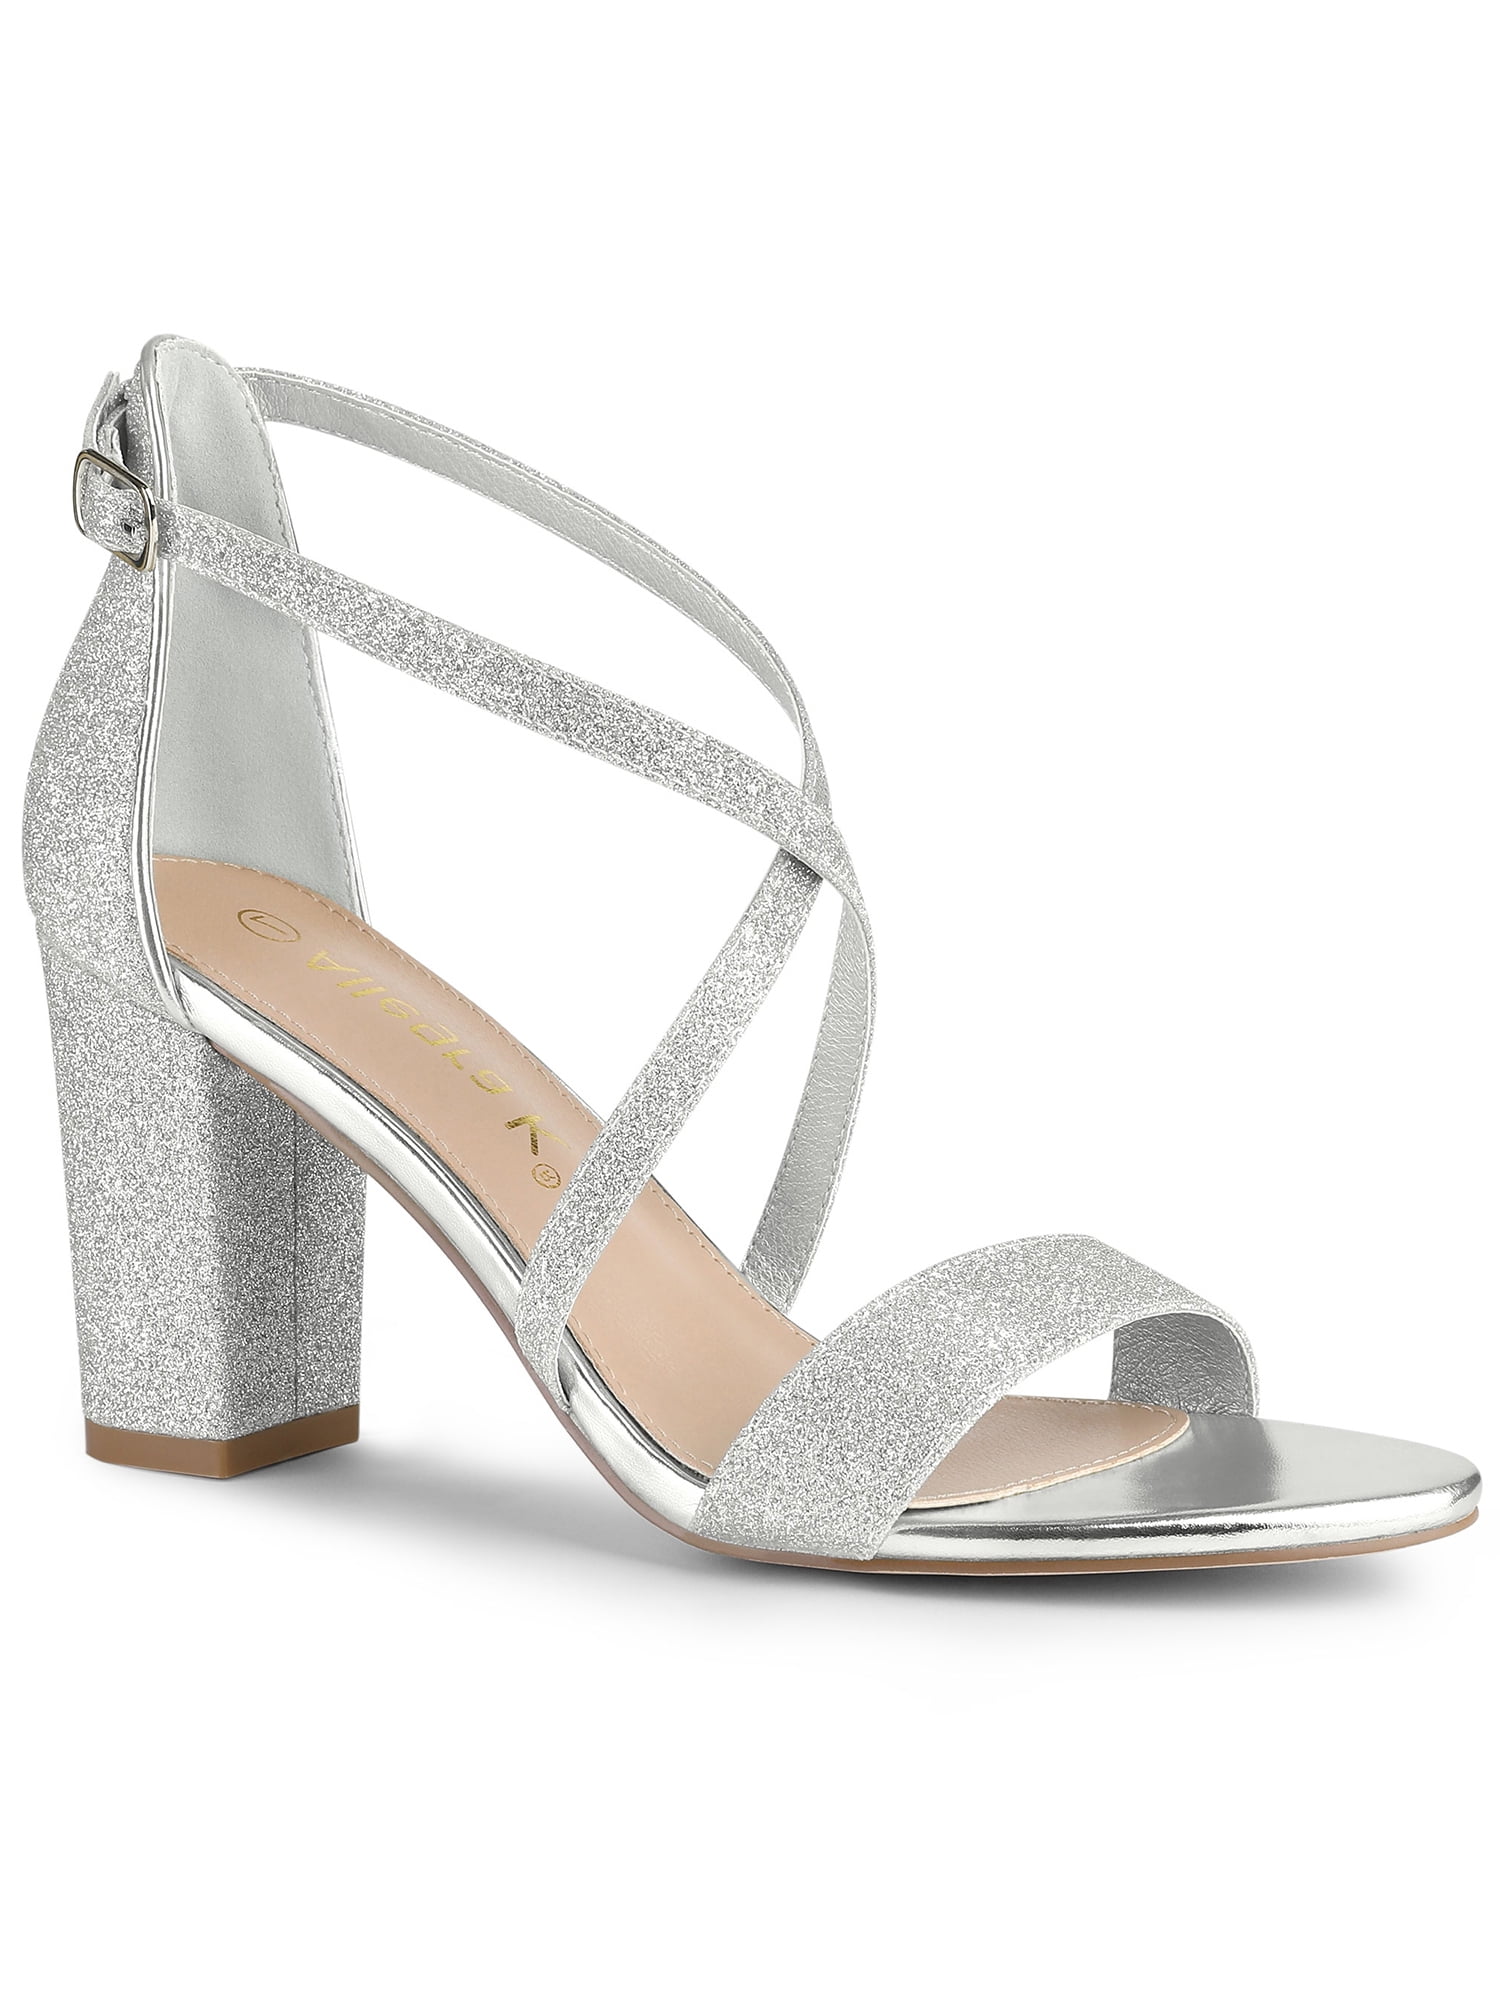 grey ankle strap heels, strappy ankle block heels – Say More Boutique